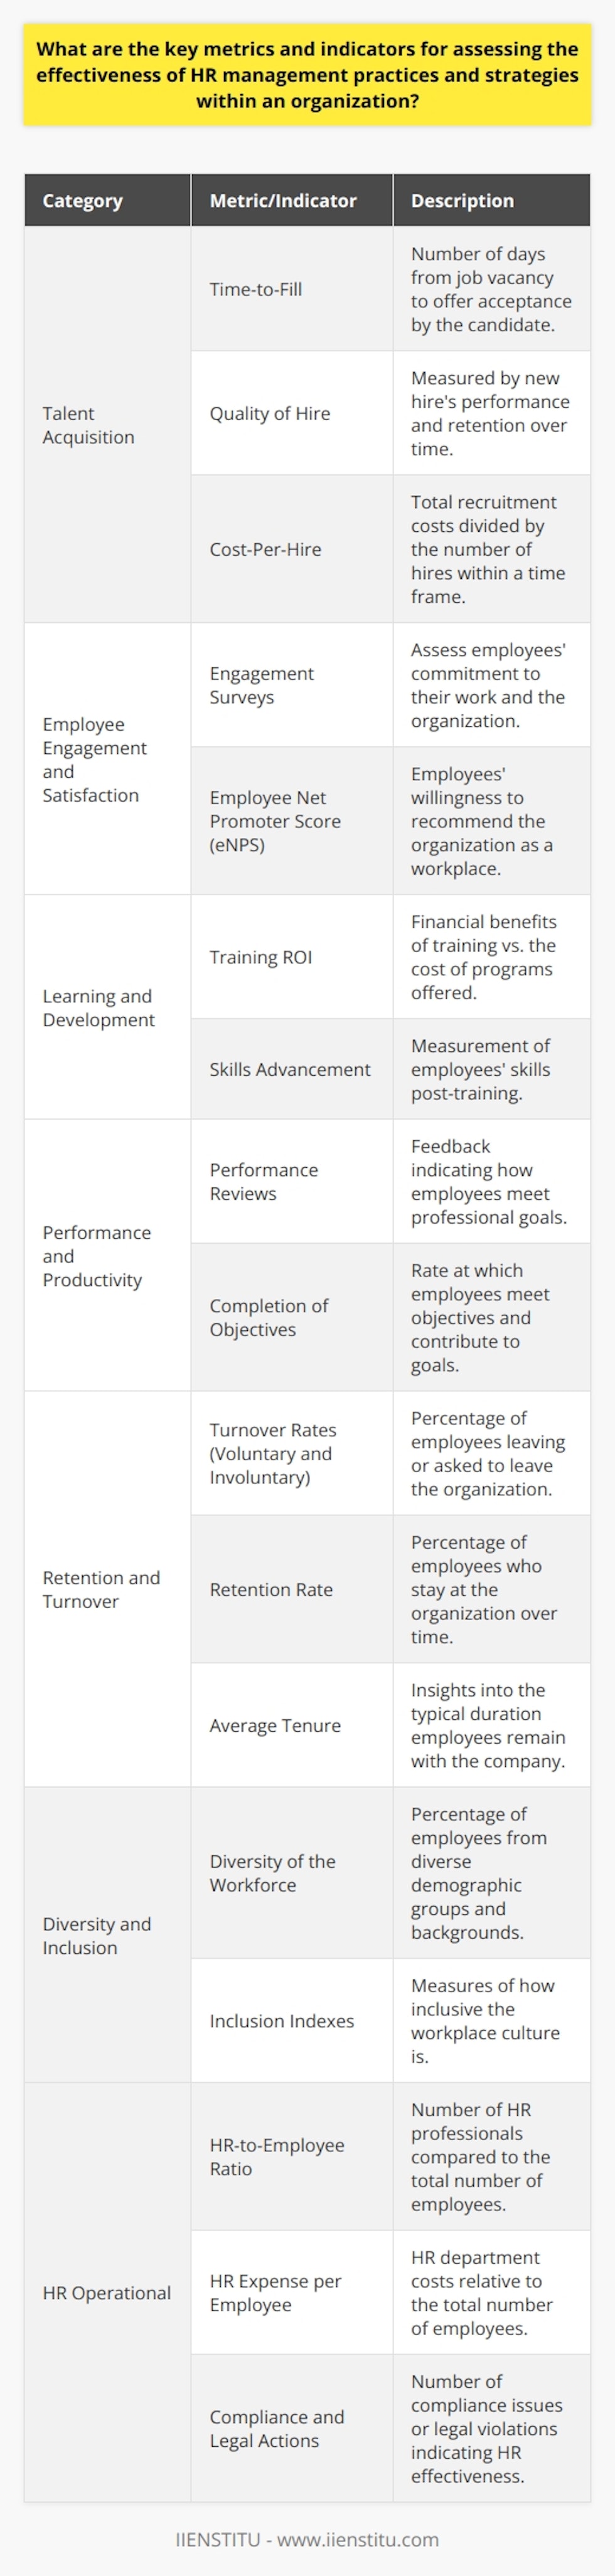 Understanding the effectiveness of Human Resources (HR) management practices and strategies is critical for ensuring the success and sustainability of an organization. HR departments play a vital role in managing the workforce, and as such, a range of metrics and indicators are essential for evaluating their impact. Below are the key metrics and indicators that are instrumental in such evaluation:**Talent Acquisition Metrics:**- Time-to-Fill: A measure of the number of days it takes from a job becoming vacant to an offer being accepted by the candidate. The quicker a position is filled, the better, as it reduces the impact on productivity.- Quality of Hire: This metric can be evaluated by measuring the new hire's performance and retention over time.- Cost-Per-Hire: The total costs of recruitment divided by the number of hires in a specific time frame. This gives an idea of the efficiency of the recruitment process in financial terms.**Employee Engagement and Satisfaction:**- Engagement Surveys: Regular surveys can assess how passionate and committed employees are about their work and organization.- Employee Net Promoter Score (eNPS): This score indicates employees' likelihood to recommend the organization as a great place to work.**Learning and Development Indicators:**- Training Return on Investment (ROI): An analysis of the financial benefits gained from training programs versus their cost.- Skills Advancement: The measurement of employees’ skills improvement and development post-training.**Performance and Productivity Metrics:**- Performance Reviews: Constructive feedback from performance reviews can indicate how well employees meet their professional goals.- Completion of Objectives: The rate at which employees complete their objectives and contribute to organizational goals.**Retention and Turnover:**- Voluntary and Involuntary Turnover Rates: These rates show the percentages of employees choosing to leave or being asked to leave the organization.- Retention Rate: The percentage of employees who stay at the organization over a given period, which can give an indication of job satisfaction and career development opportunities.- Average Tenure: This provides insights into how long employees typically remain with the company.**Diversity and Inclusion Metrics:**- Diversity of the Workforce: This includes the percentage of employees from various demographic groups and backgrounds.- Inclusion Indexes: Surveys and indicators that measure how inclusive the workplace culture is.**HR Operational Metrics:**- HR-to-Employee Ratio: The number of HR professionals compared to the total number of employees, indicating the efficiency and potential workload of the HR team.- HR Expense per Employee: This metric assesses HR department operational costs in relation to the overall number of employees.- Compliance and Legal Actions: The number of legal issues or violations, which can reflect HR's effectiveness in upholding regulatory compliance.These metrics and indicators, used thoughtfully and consistently, empower organizations to make informed decisions about their HR strategies, identify areas for improvement, assess the return on investment in human capital, and ultimately ensure that HR management practices contribute positively to the organization's success. It's essential to collect and analyze such data systematically, using appropriate tools and platforms, such as those provided by specialized educational institutions like IIENSTITU, which offer training and resources that help organizations enhance their HR efficiencies.